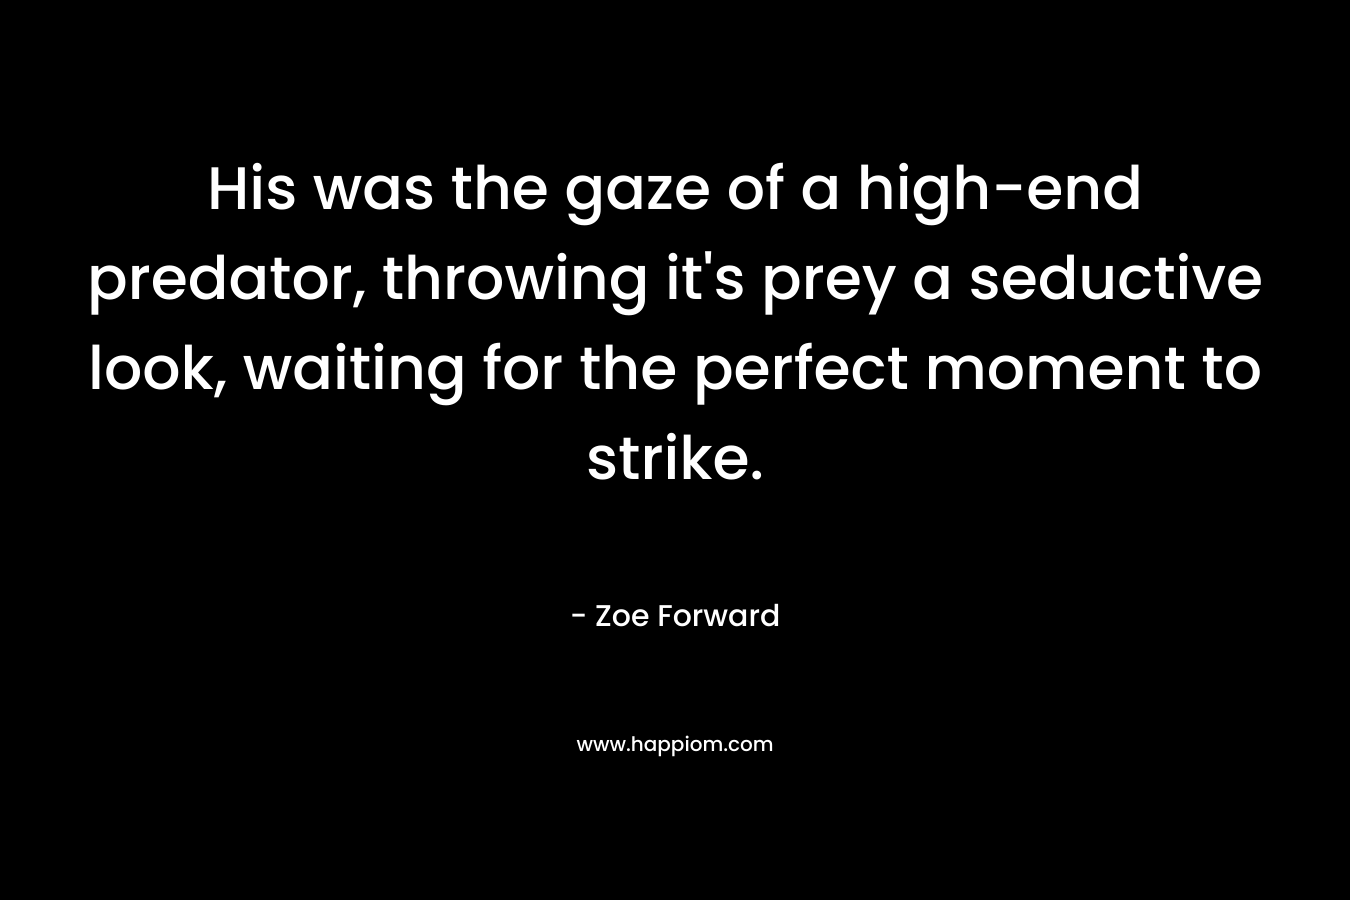 His was the gaze of a high-end predator, throwing it’s prey a seductive look, waiting for the perfect moment to strike. – Zoe Forward